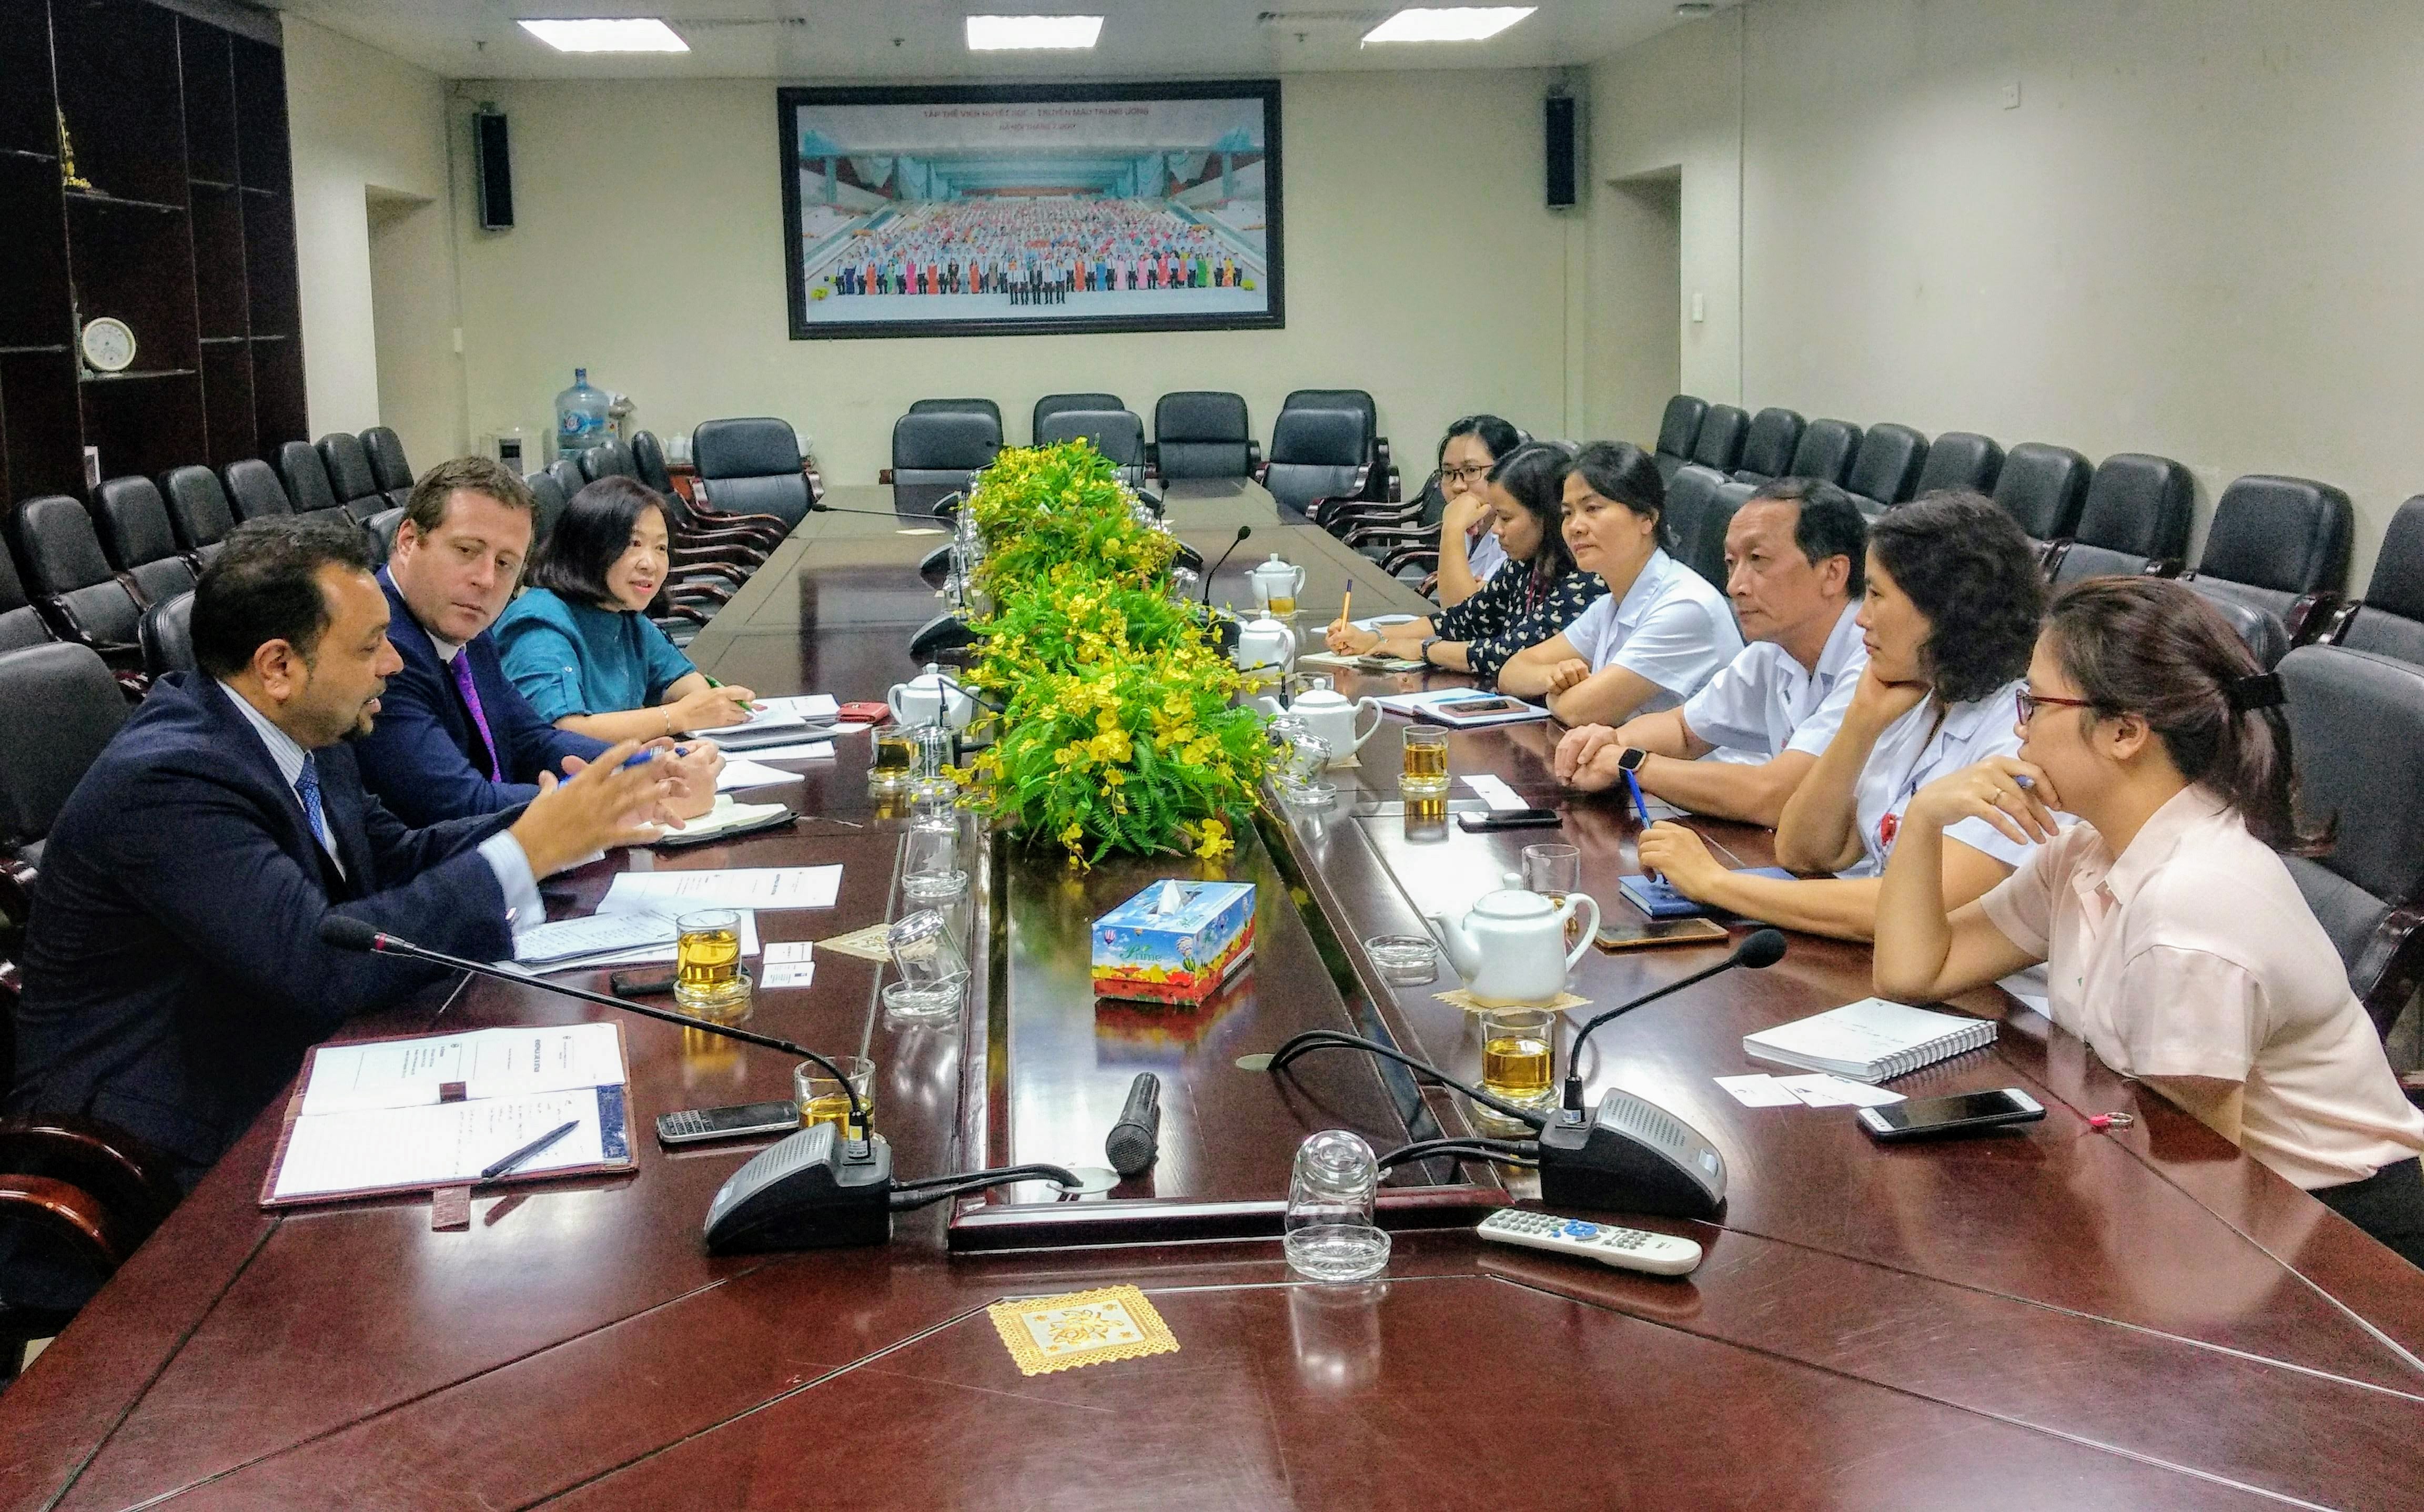 APEC Rare Disease Network leadership, including Chair Prof. Matthew Bellgard and Co-Chair Mr. Cameron Milliner, meets with the leadership team at the National Institute of Haematology and Blood Transfusion (NIHBT) in Hanoi, Viet Nam